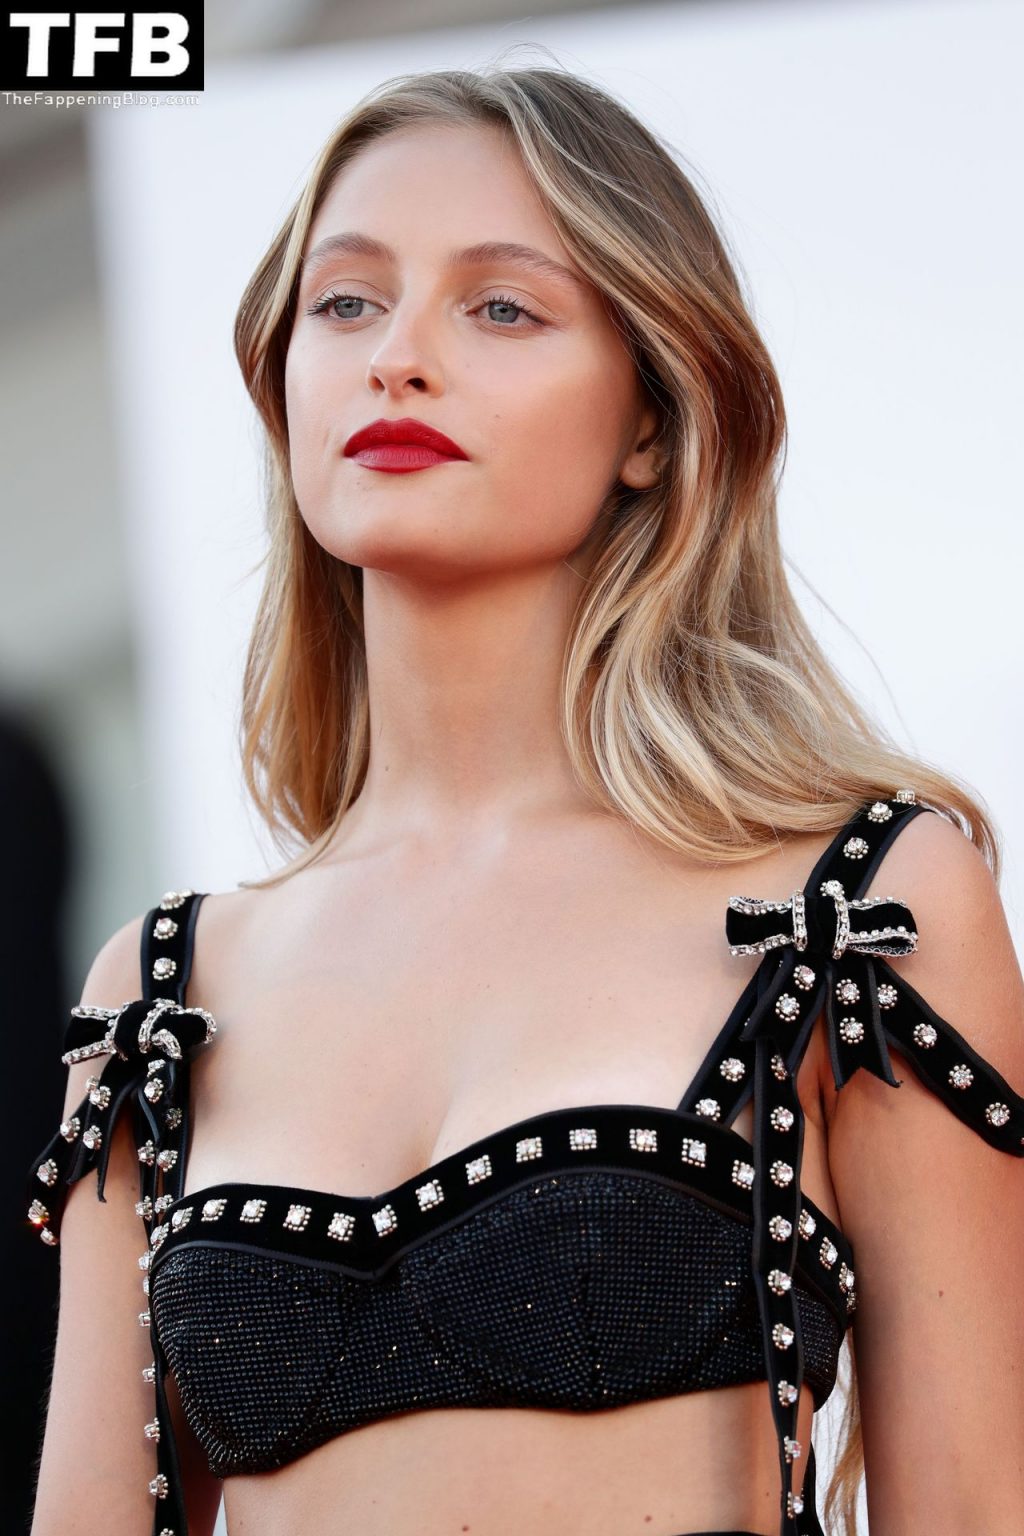 Beatrice Vendramin Poses on “The Hand Of God” Red Carpet at the 78th Venice Film Festival (84 Photos)